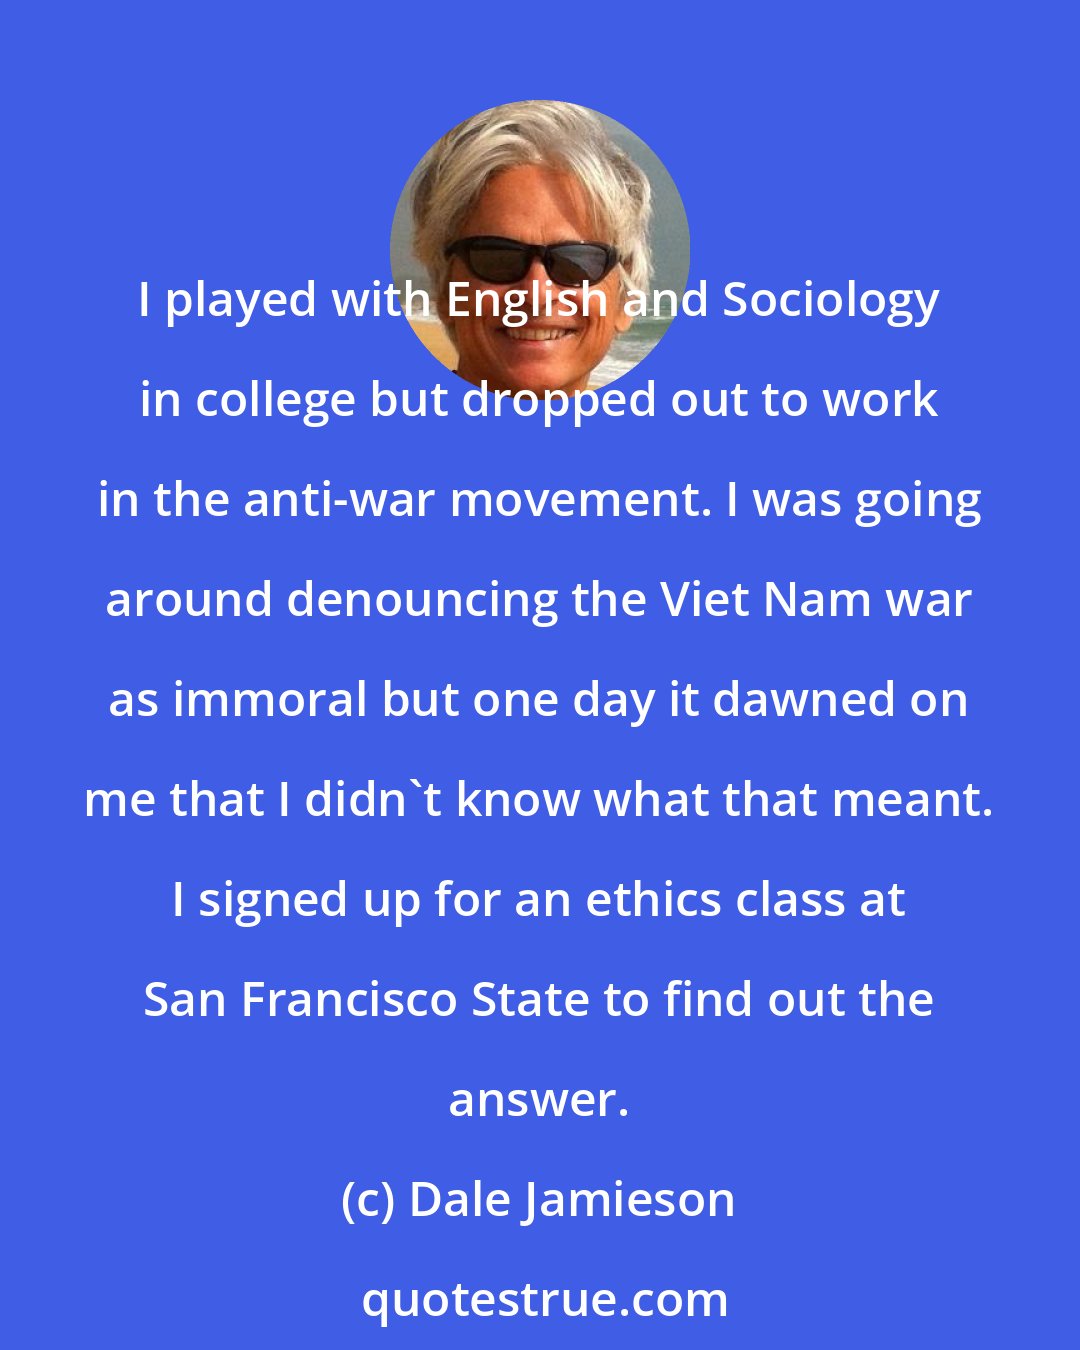 Dale Jamieson: I played with English and Sociology in college but dropped out to work in the anti-war movement. I was going around denouncing the Viet Nam war as immoral but one day it dawned on me that I didn't know what that meant. I signed up for an ethics class at San Francisco State to find out the answer.